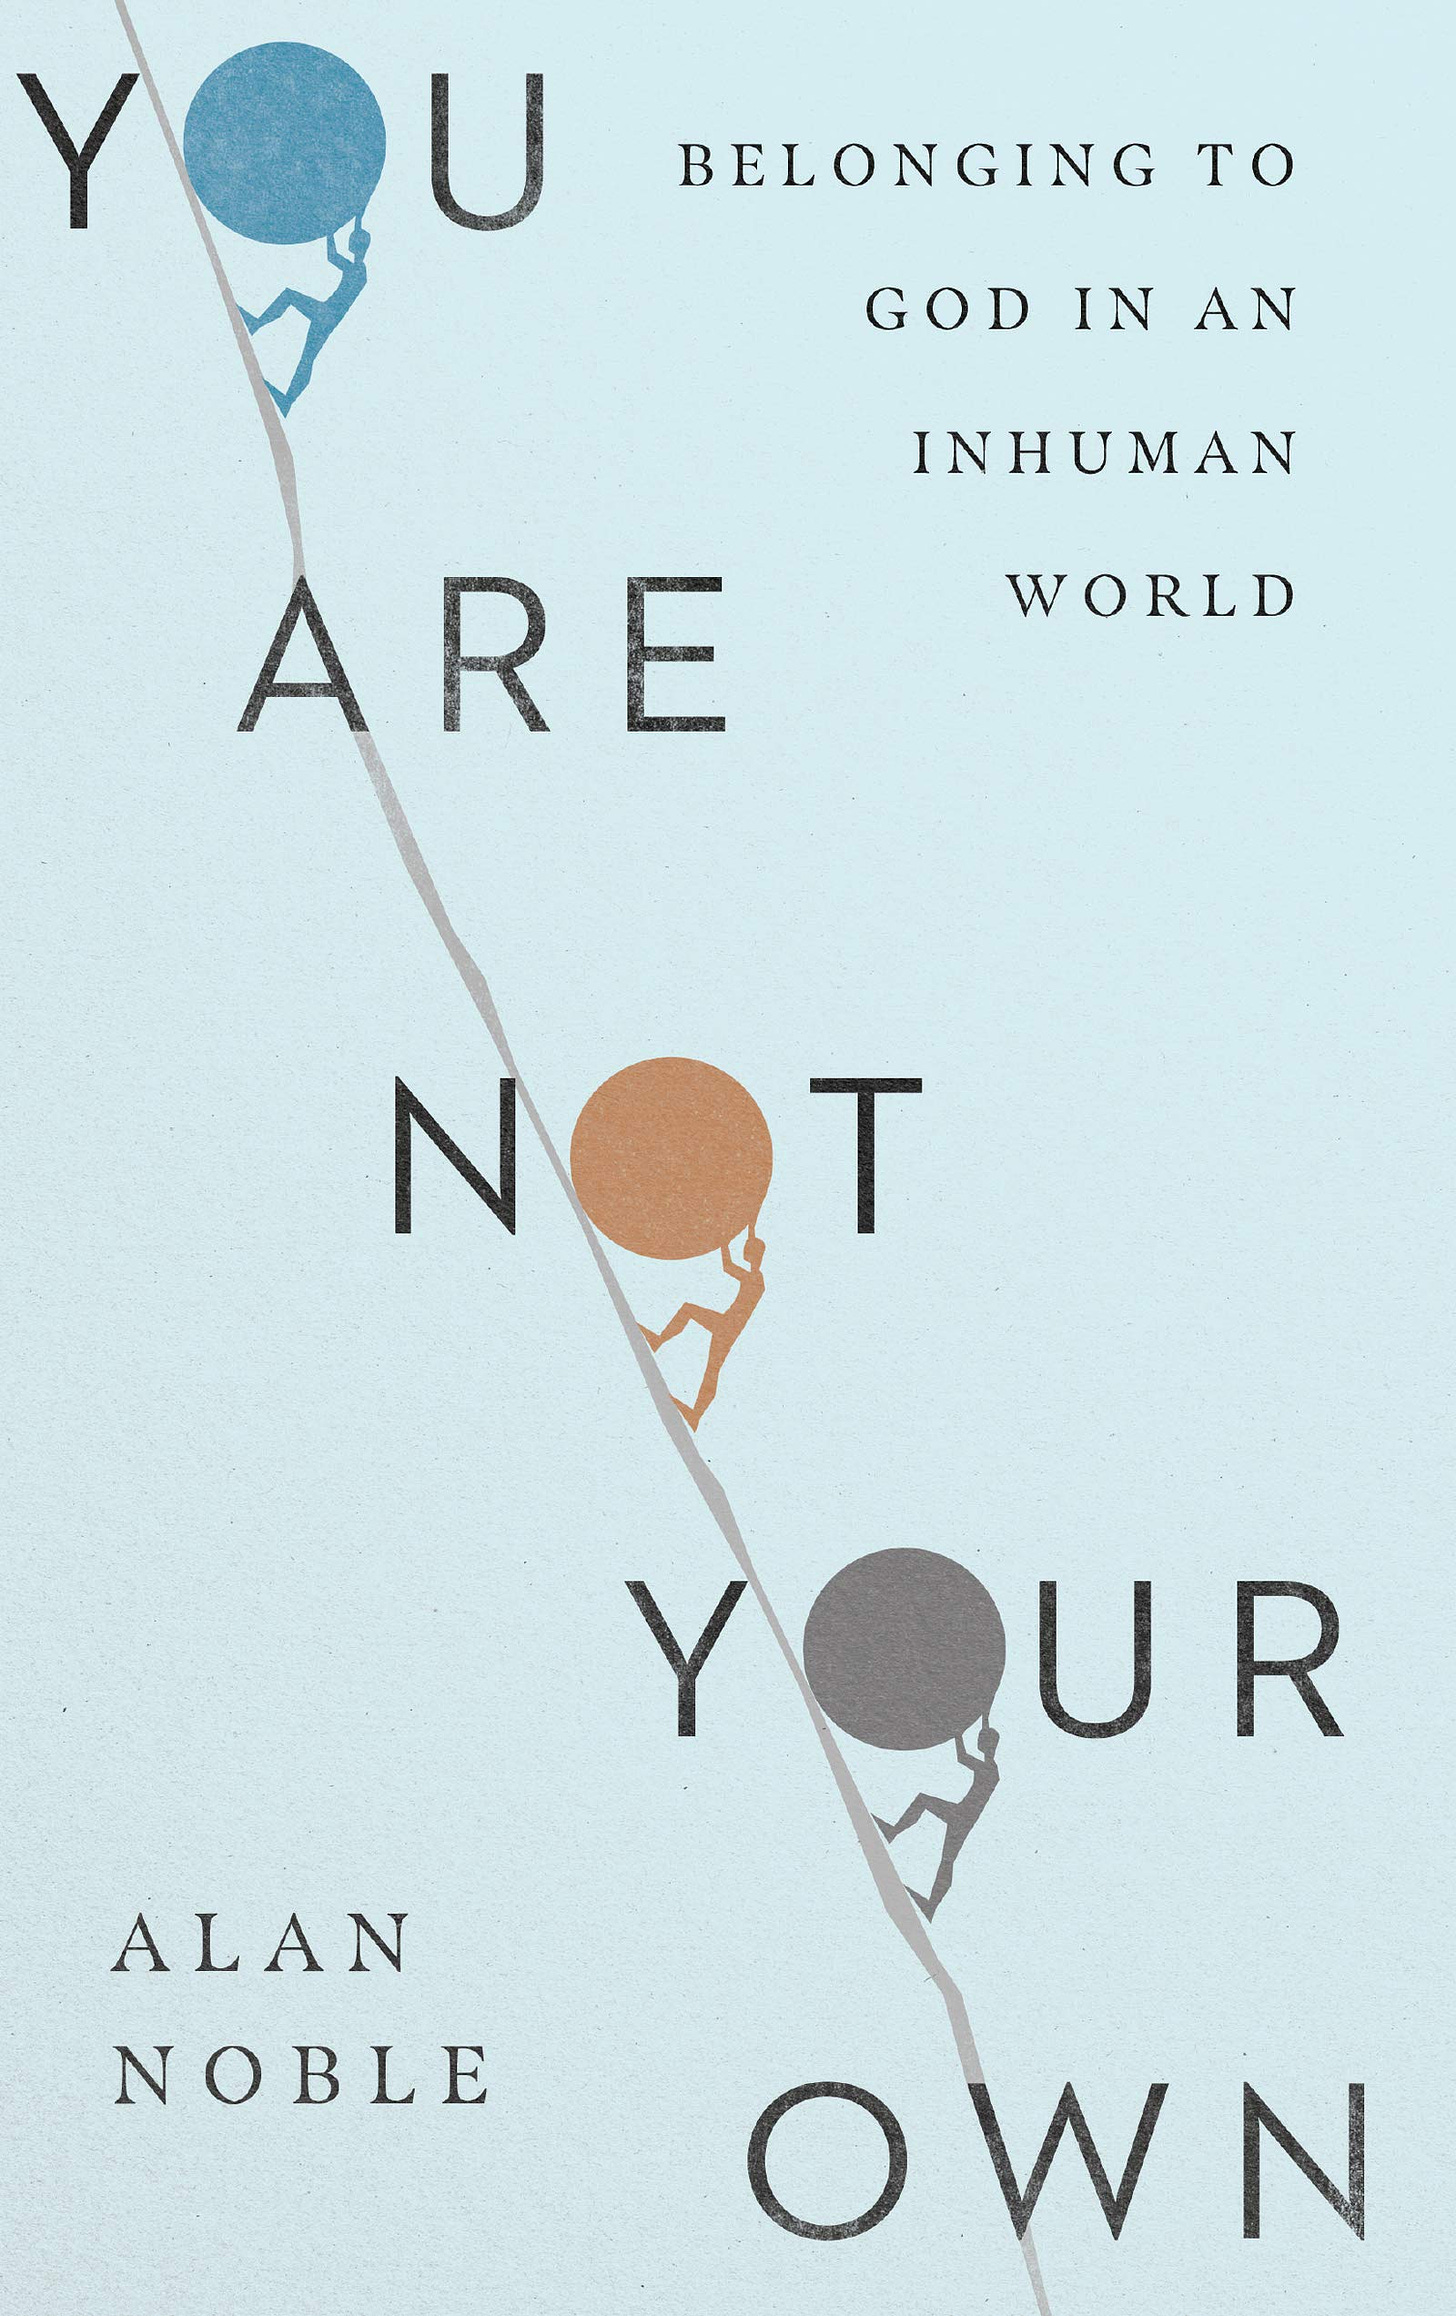 Amazon.com: You Are Not Your Own: Belonging to God in an Inhuman World:  9780830847822: Noble, Alan: Books